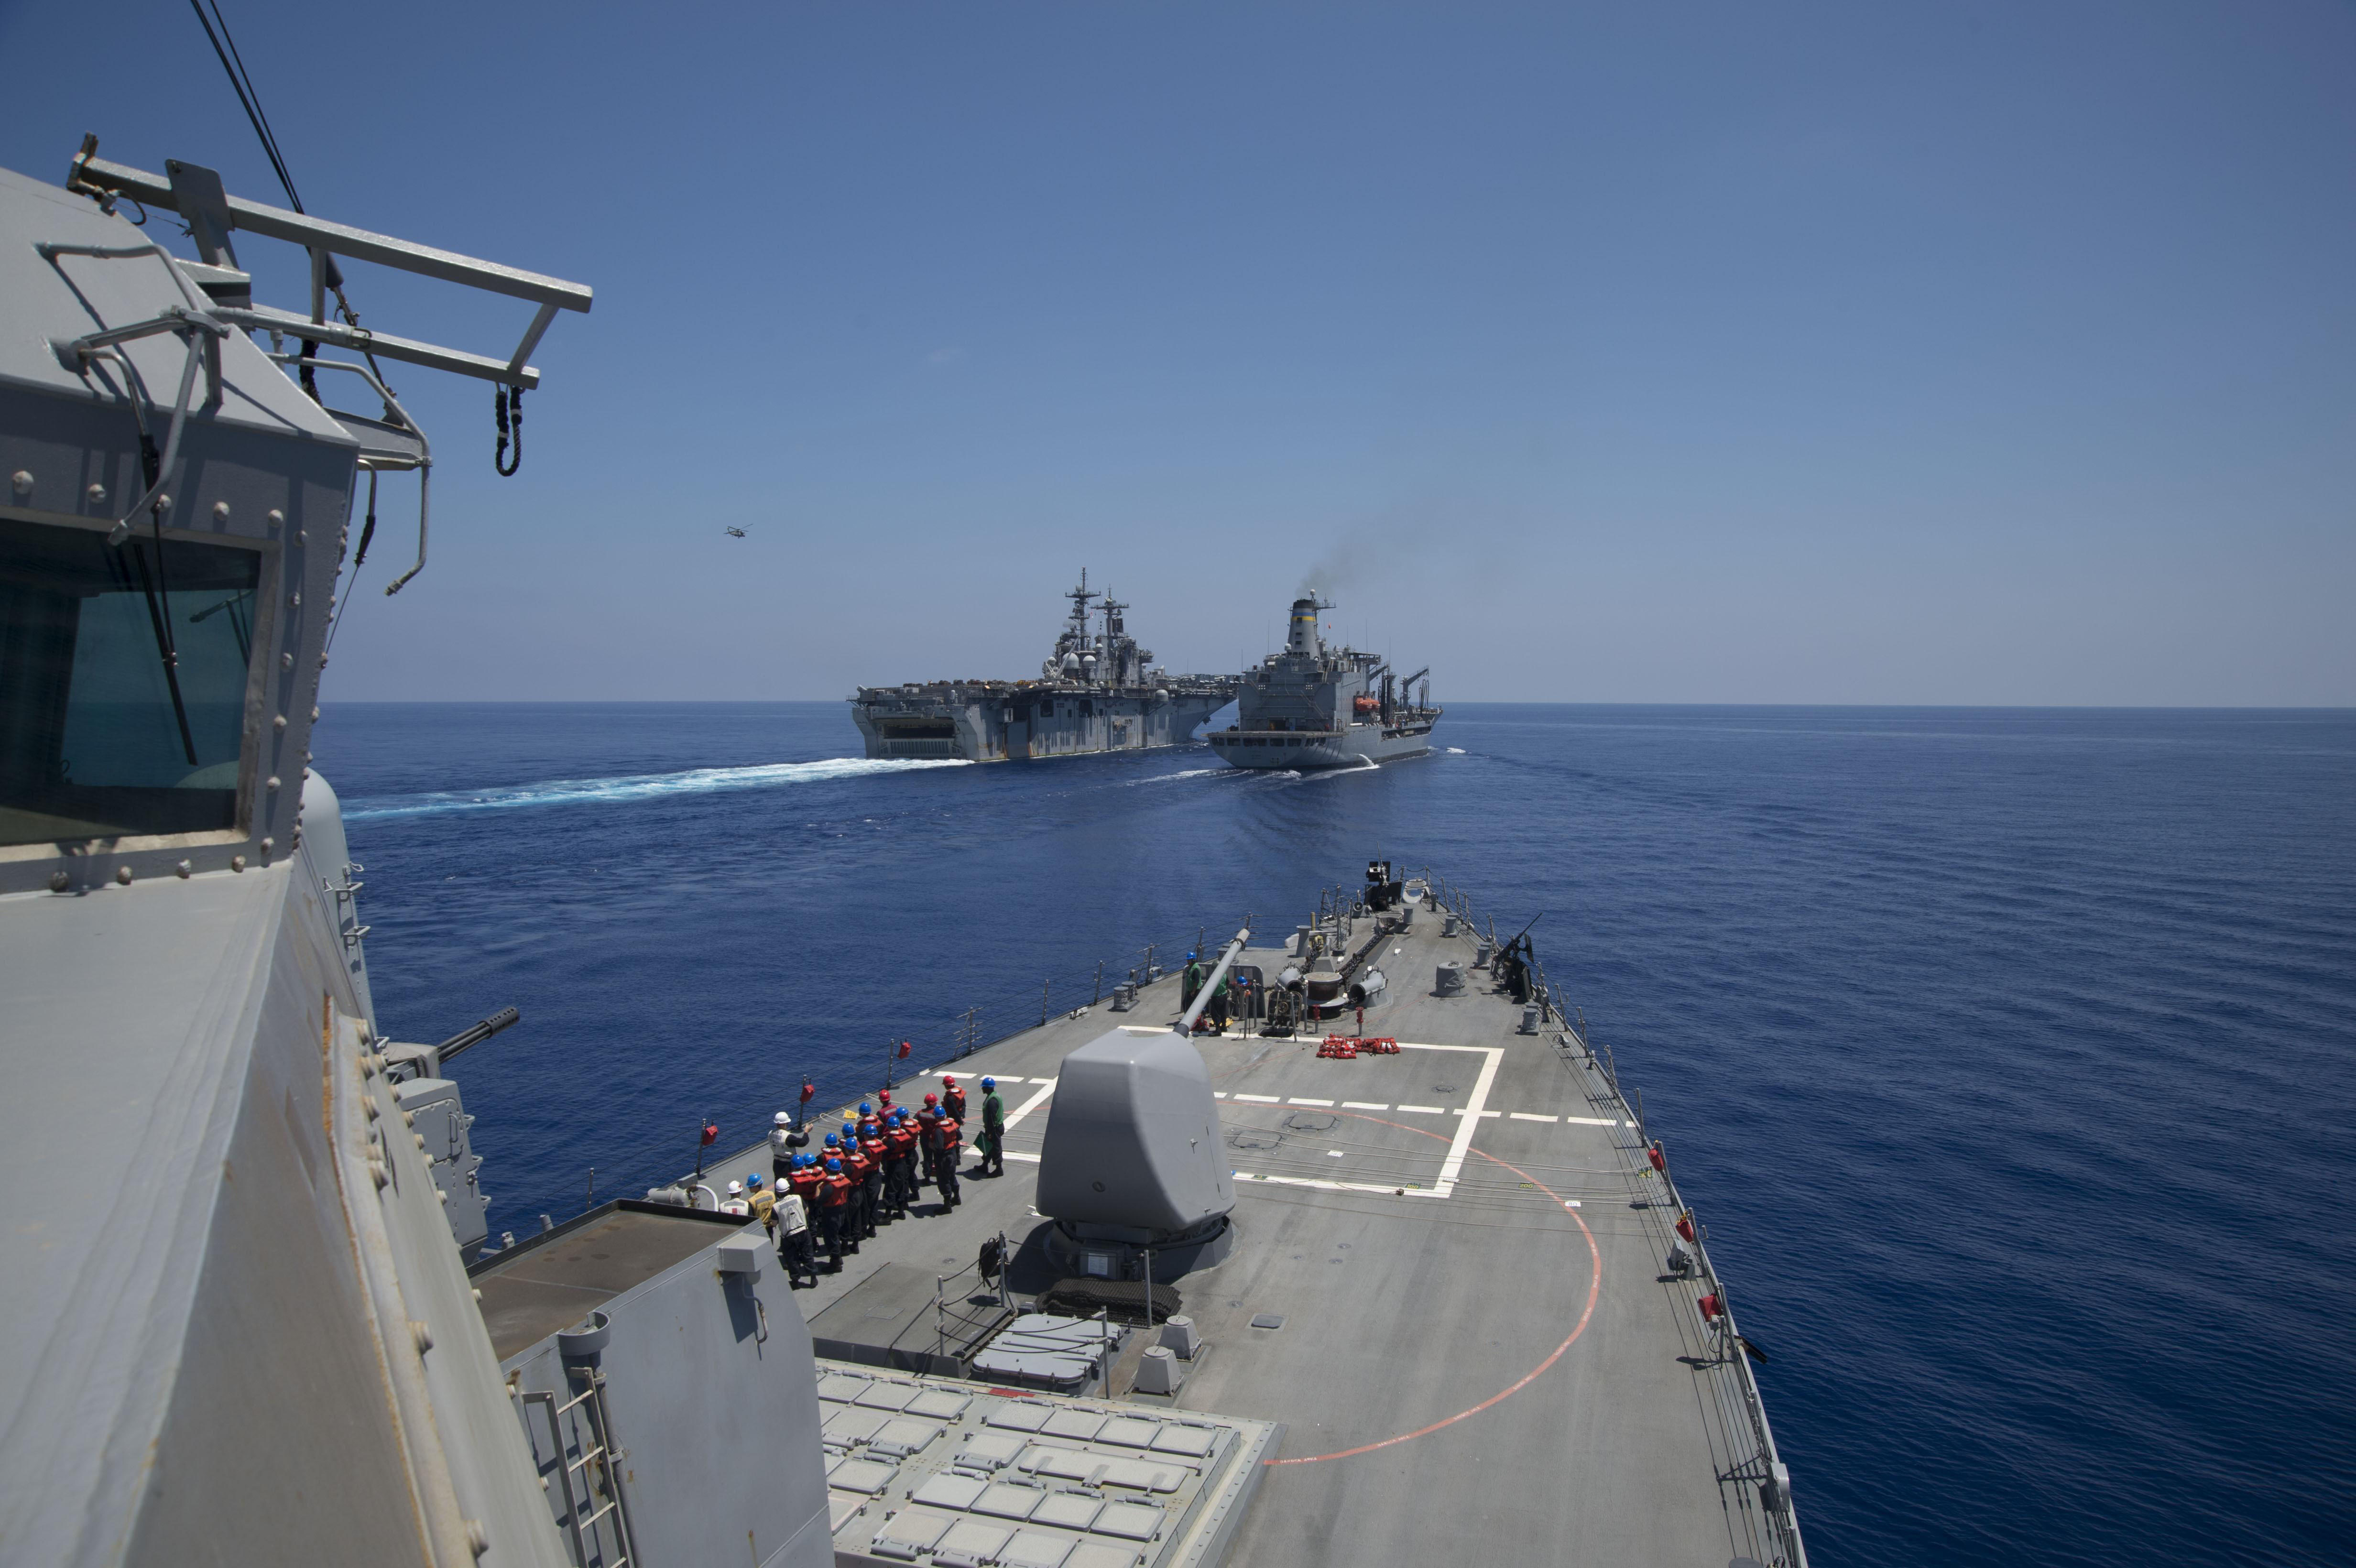 USS Carney (DDG 64) approaches the Military Sealift Command fleet replenishment oiler USNS Big Horn (T-AO-198) and USS Wasp (LHD 1) during a replenishment-at-sea in the Mediterranean Sea on Aug. 6, 2016. US Navy photo.